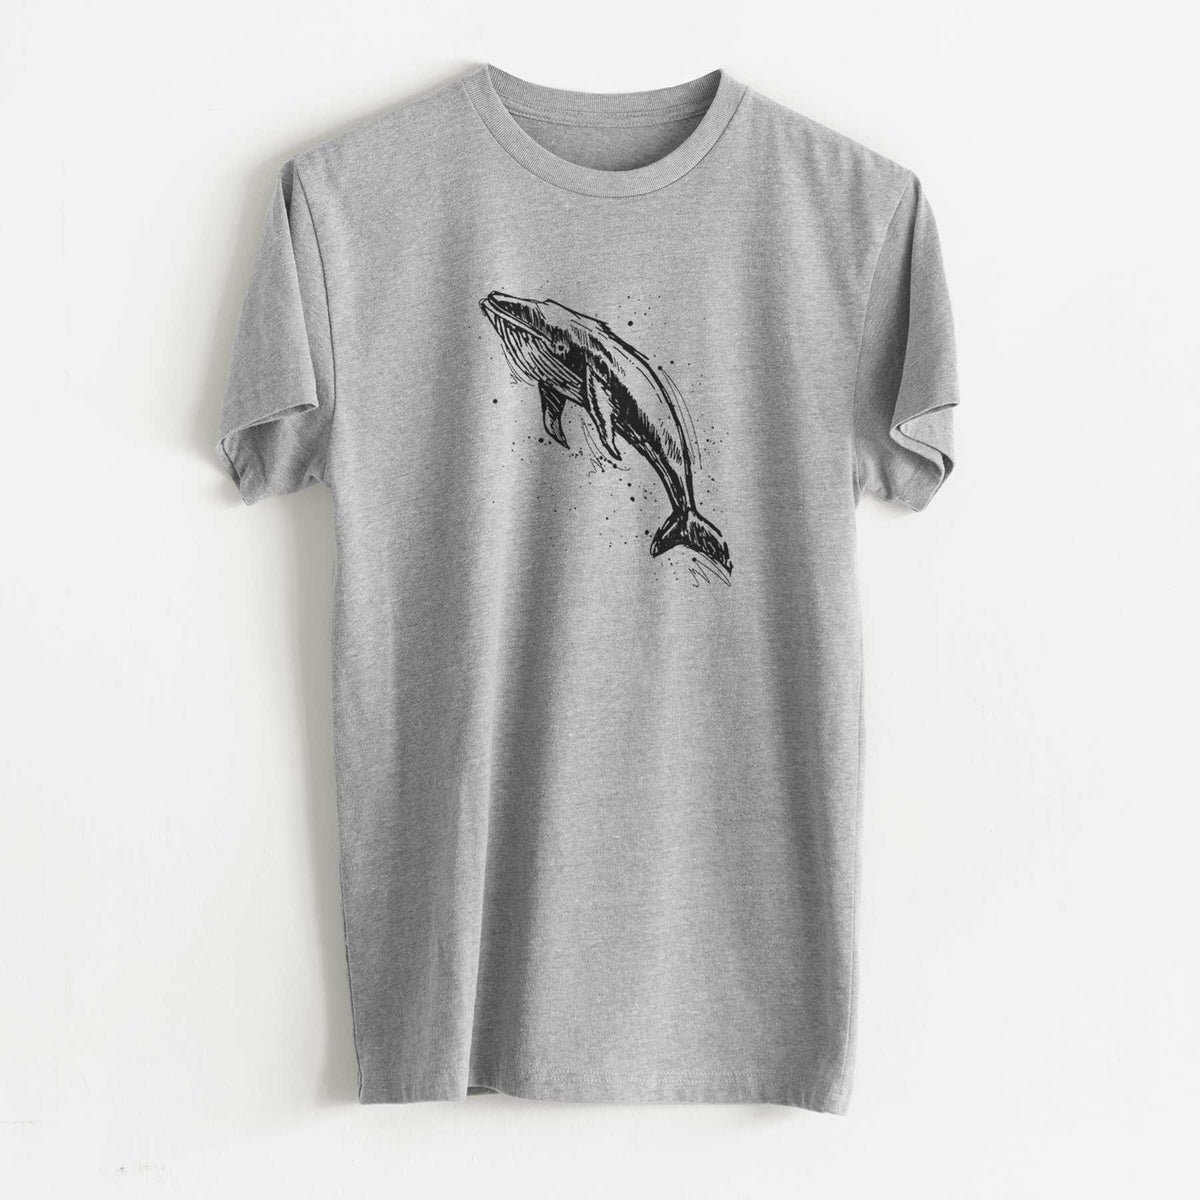 Humpback Whale - Unisex Recycled Eco Tee  - CLOSEOUT - FINAL SALE